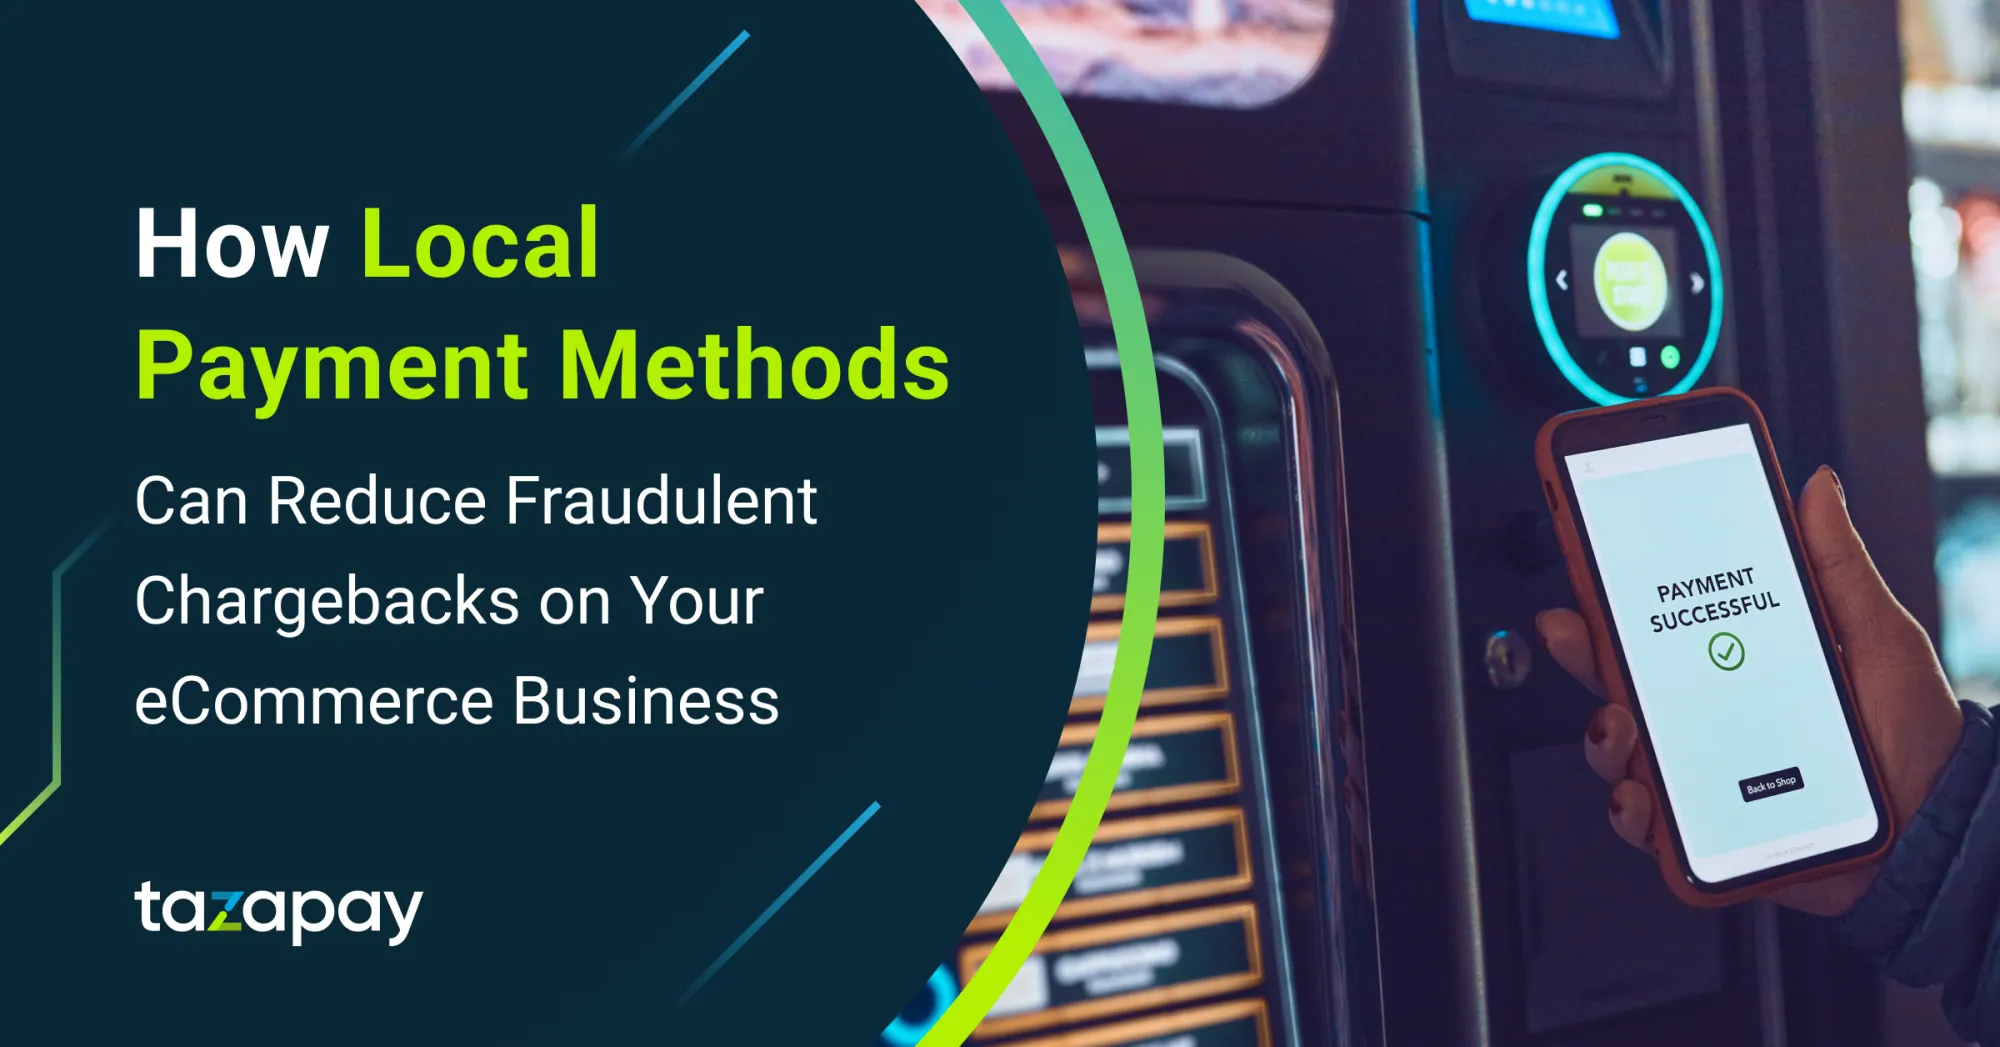 How Having Local Payment Methods Can Reduce Fraudulent Chargebacks on Your eCommerce Business